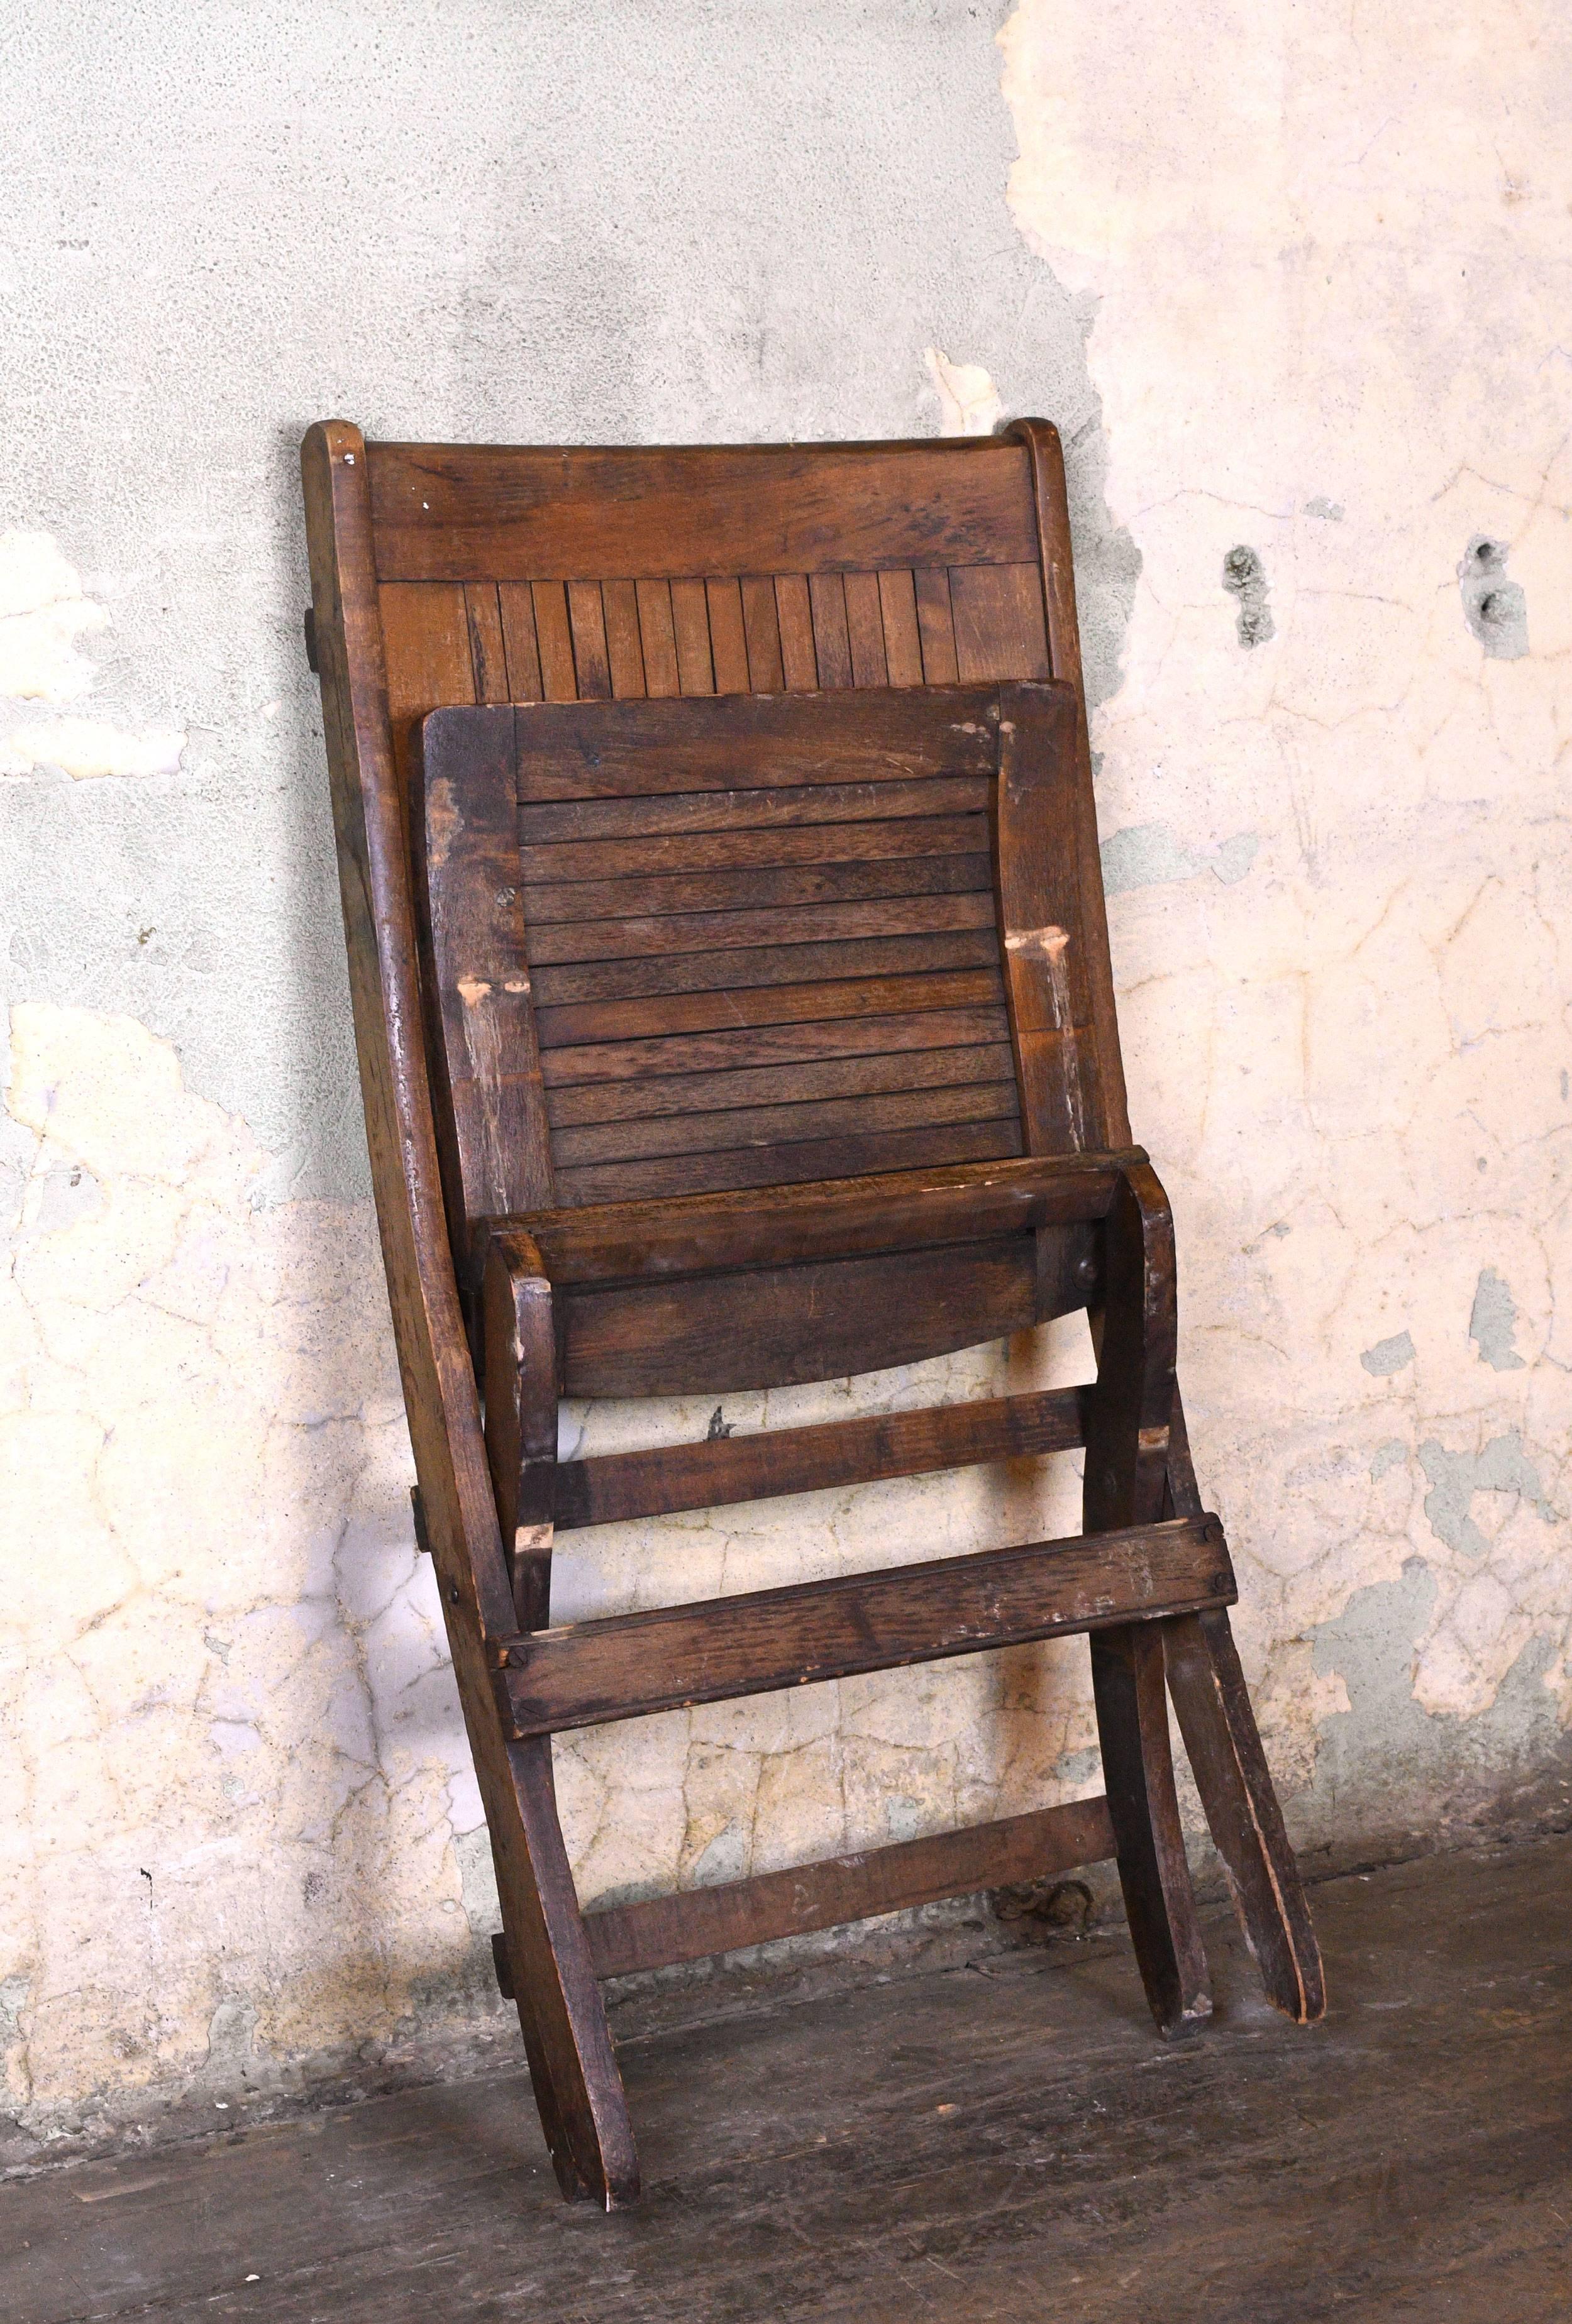 Built to last, these solid walnut folding chairs are comfortable, handsome, and practical. They have earned their patina and are the perfect rustic accent piece for any decor. See the matching double folding chairs here.
   

Circa: 1920
Condition: